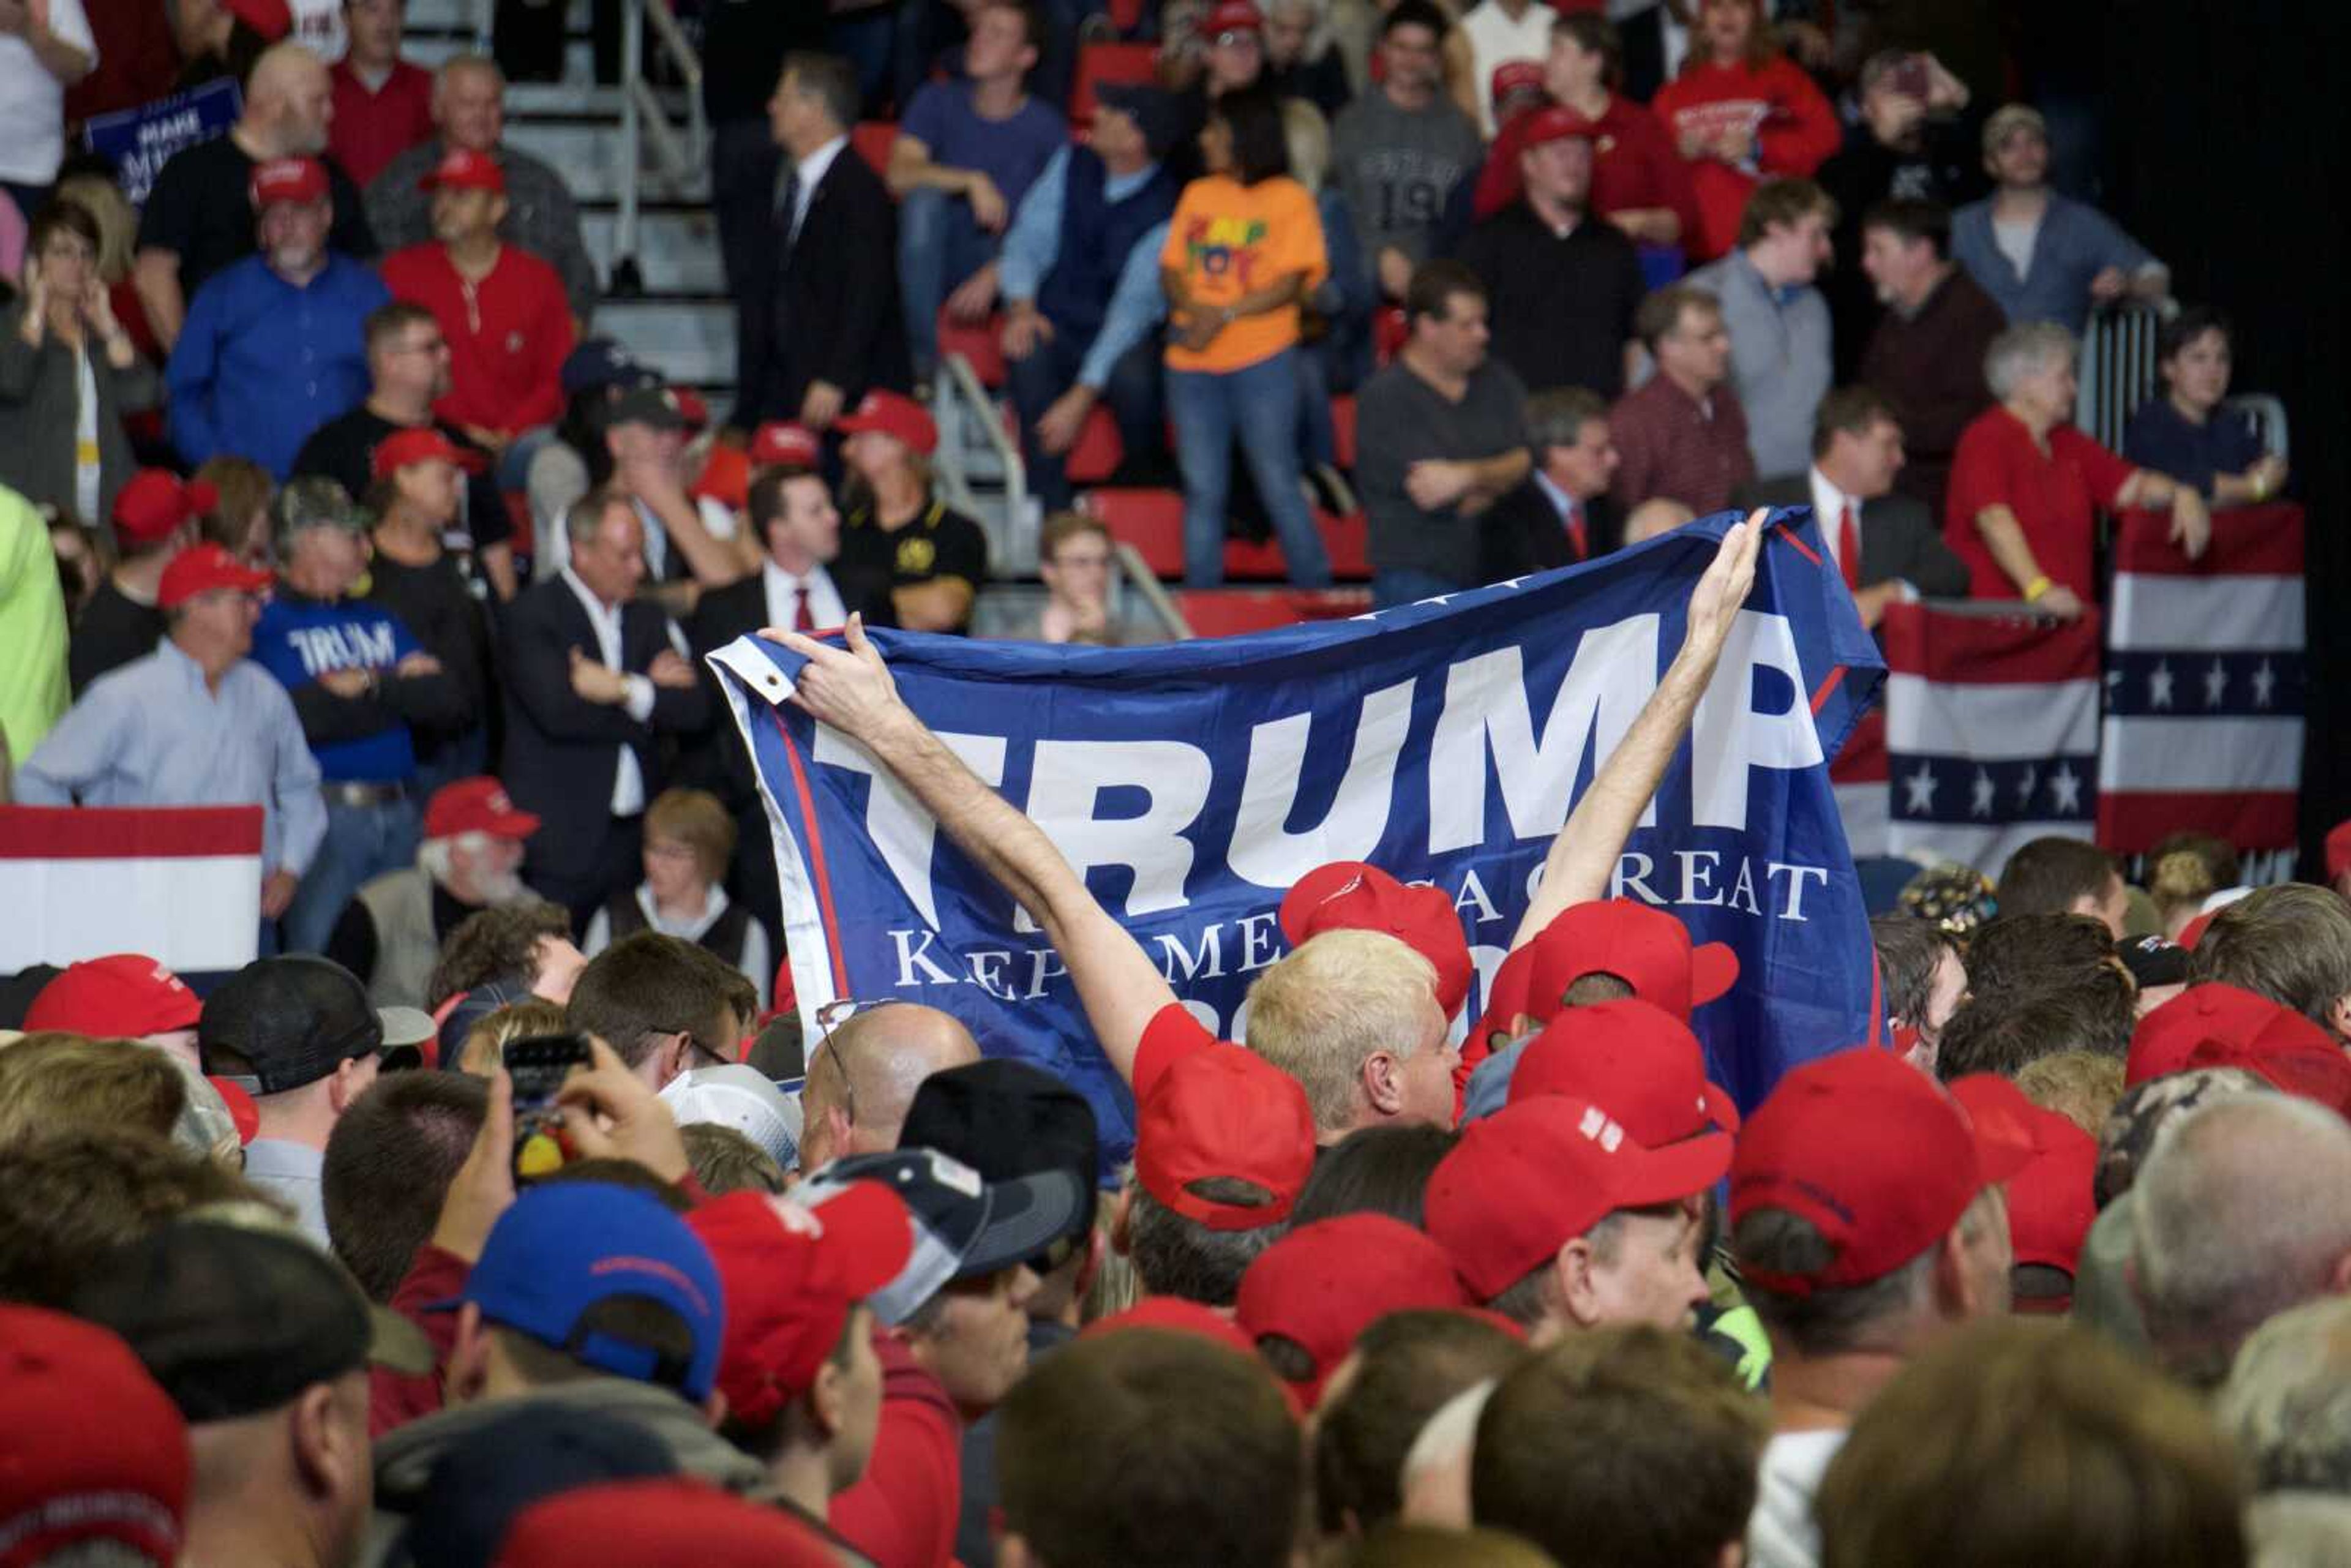 MAGA rally begins with laundry list of Missouri politicians